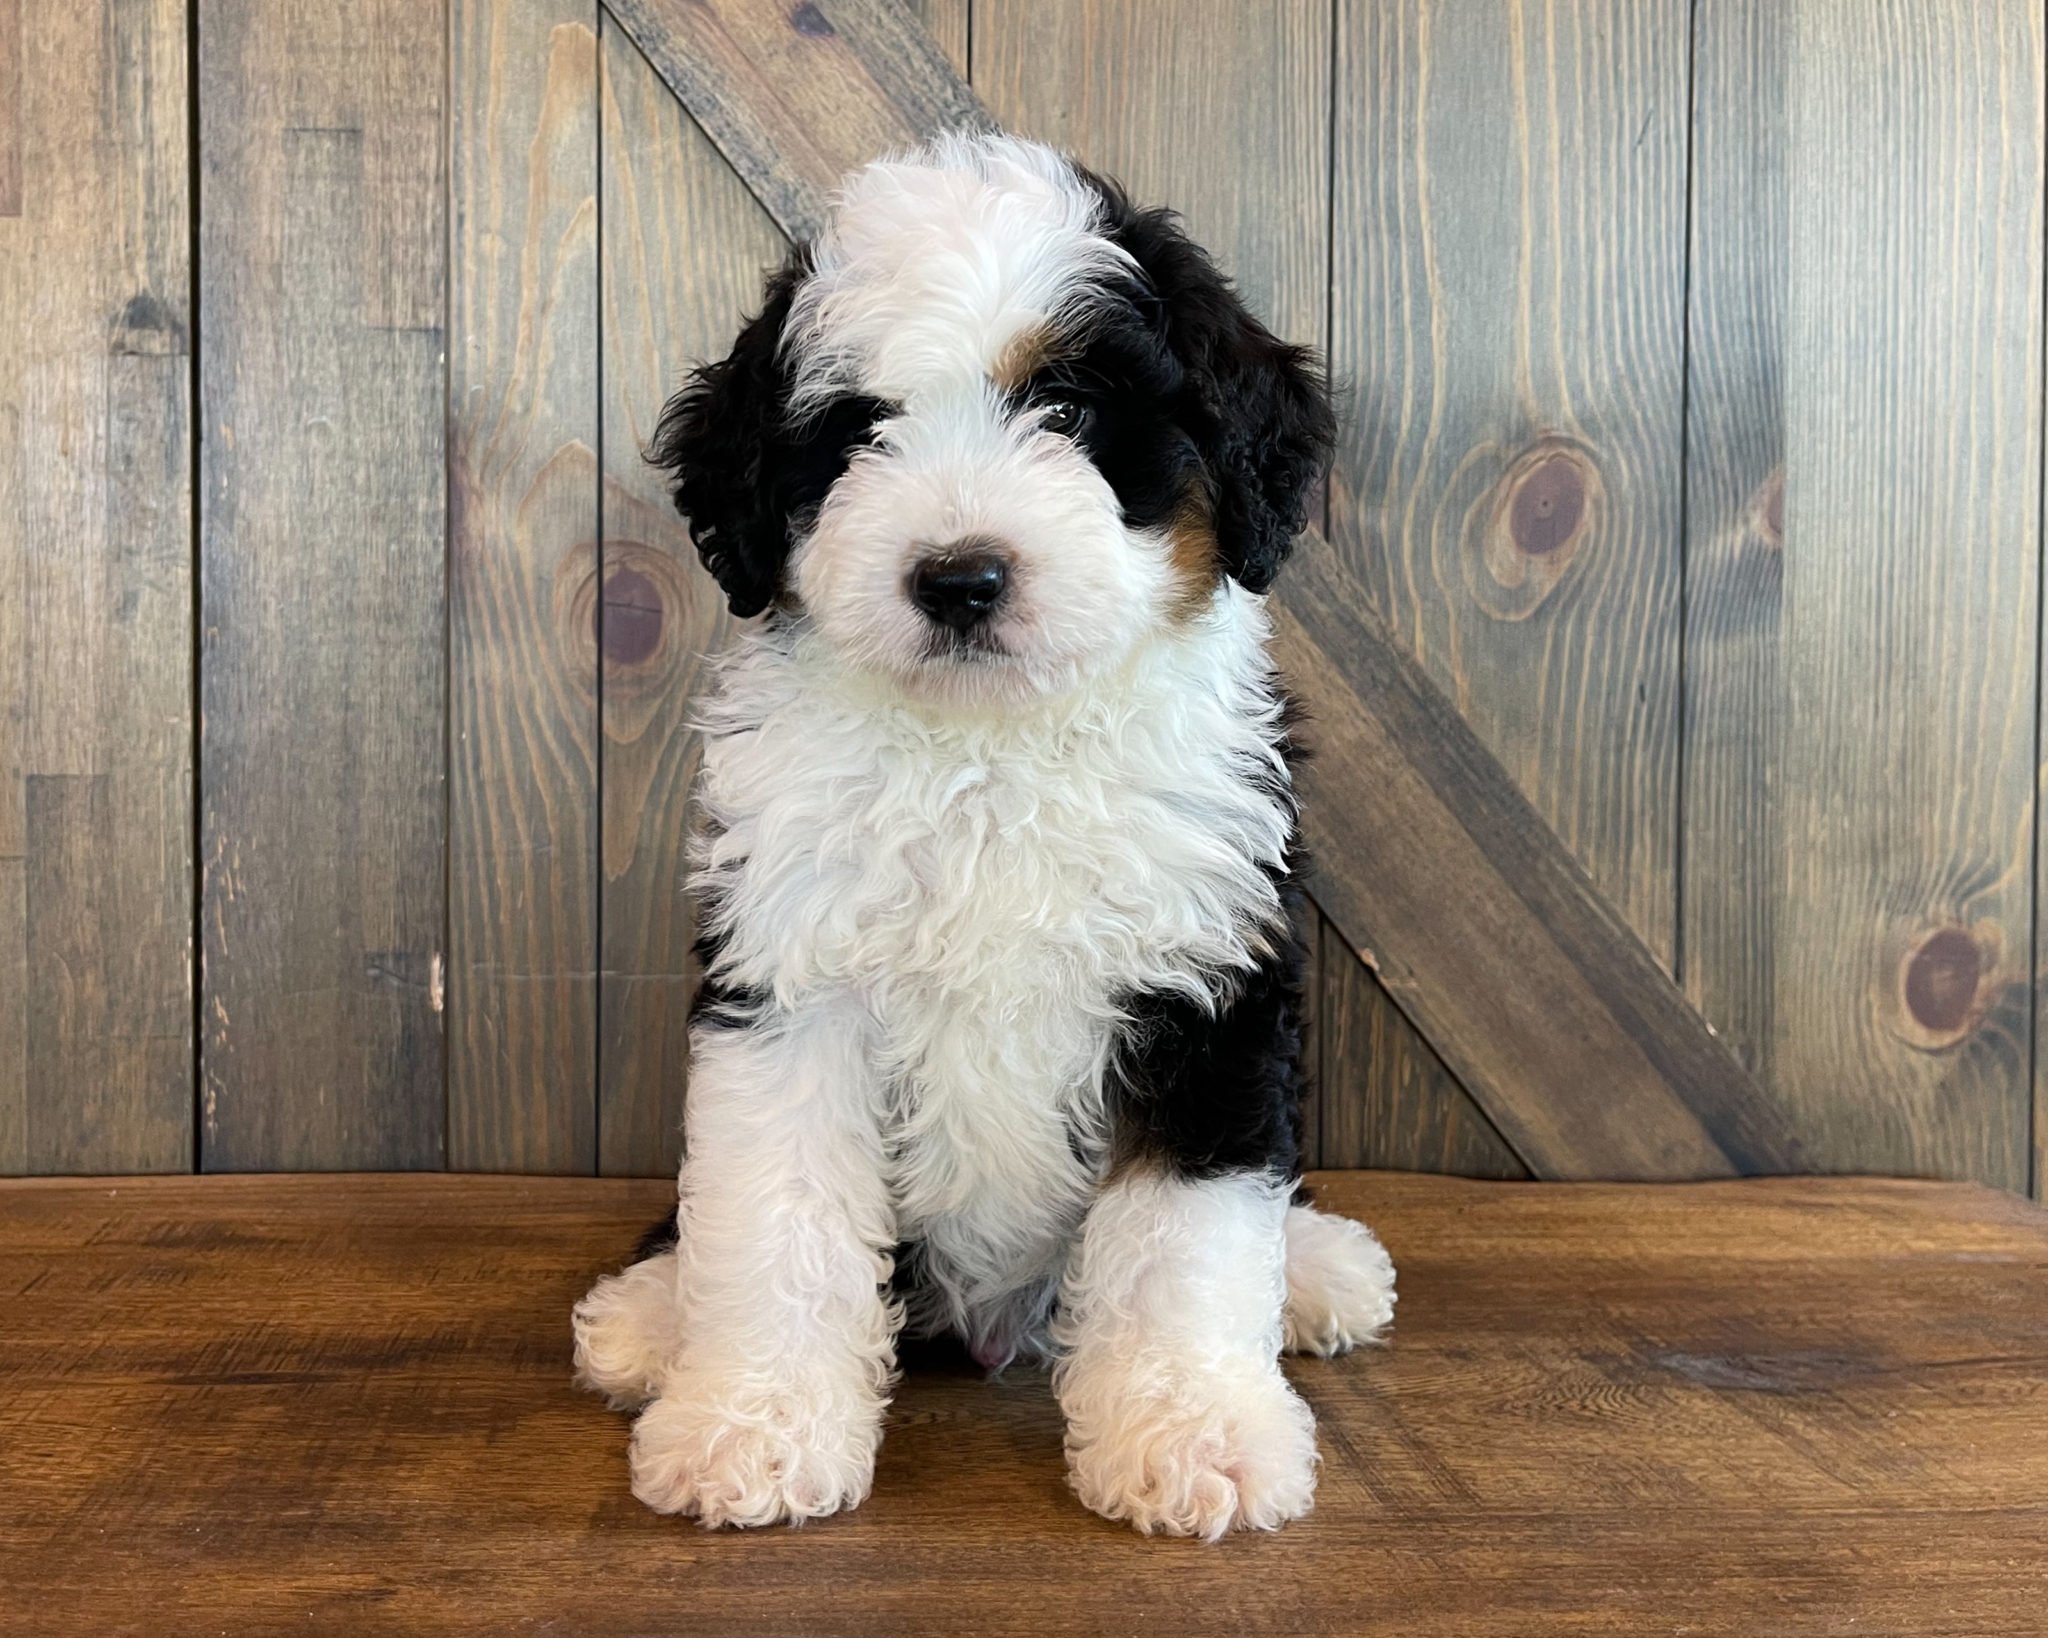 A litter of Standard Bernedoodles raised in United States by Poodles 2 Doodles